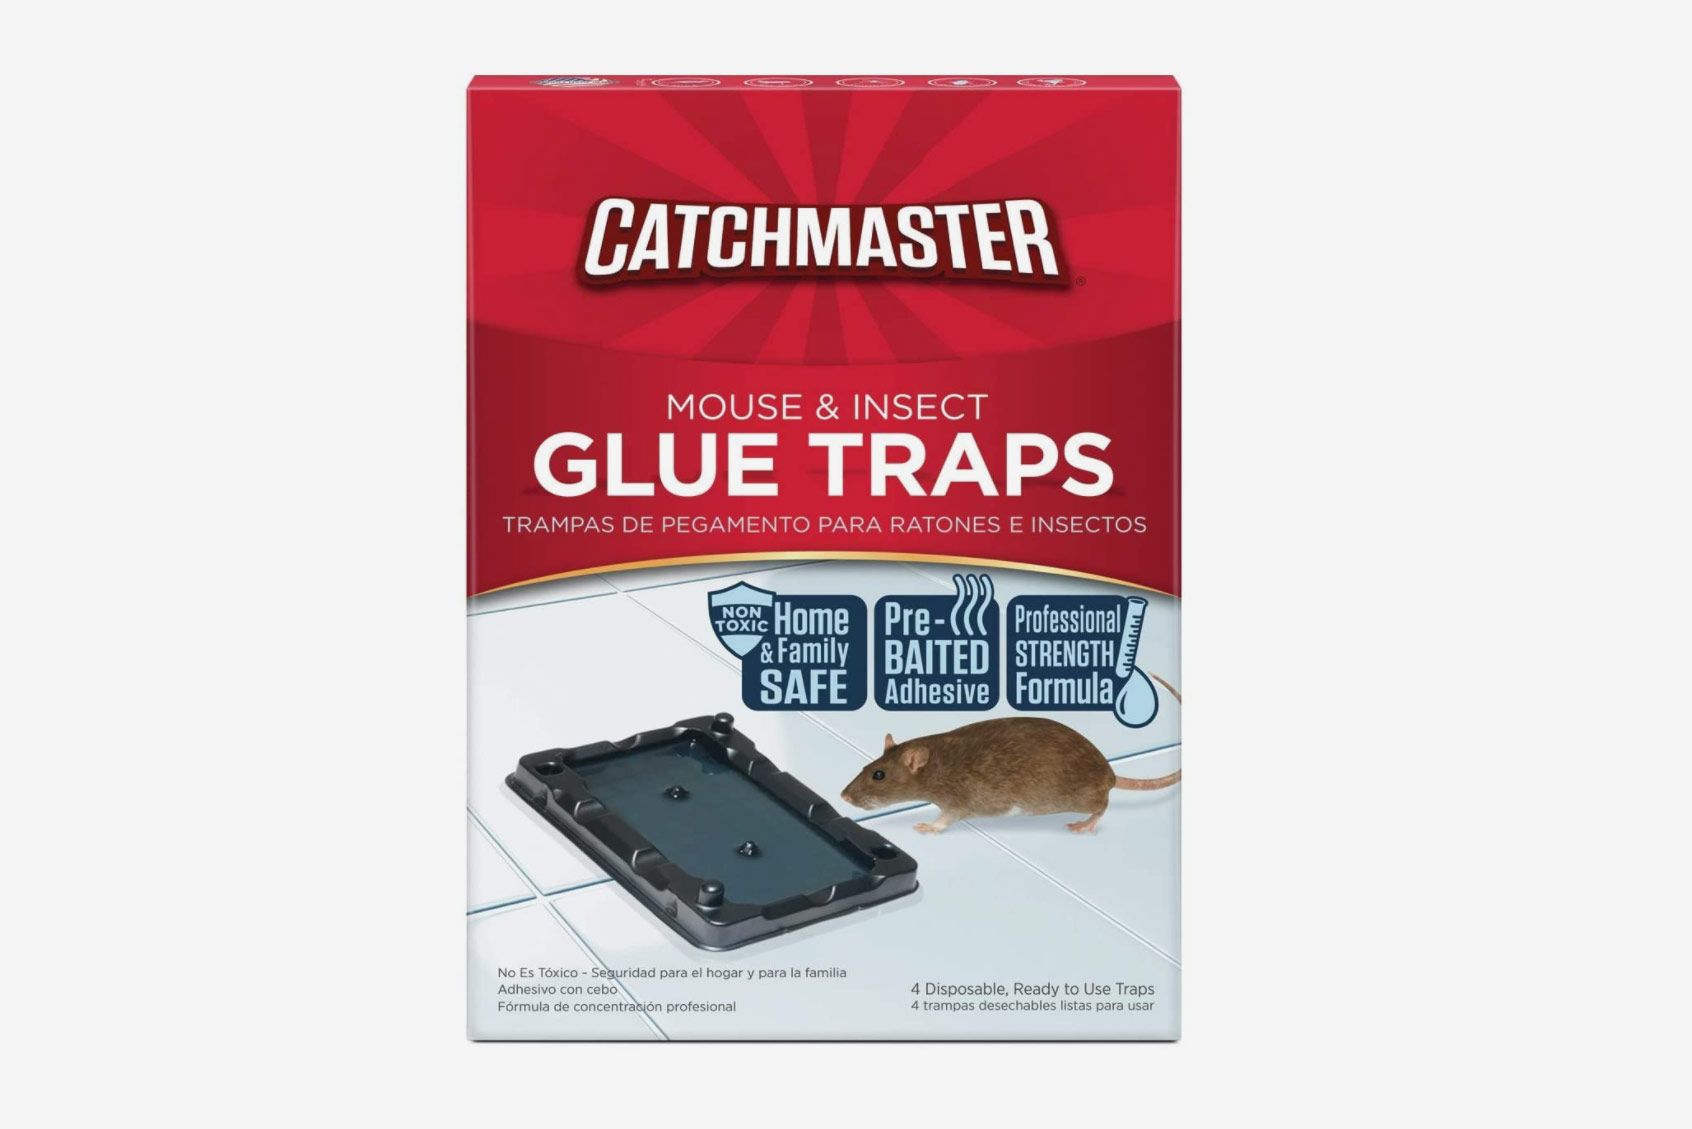 How to Remove a Live Mouse from a Sticky Trap (with Pictures)